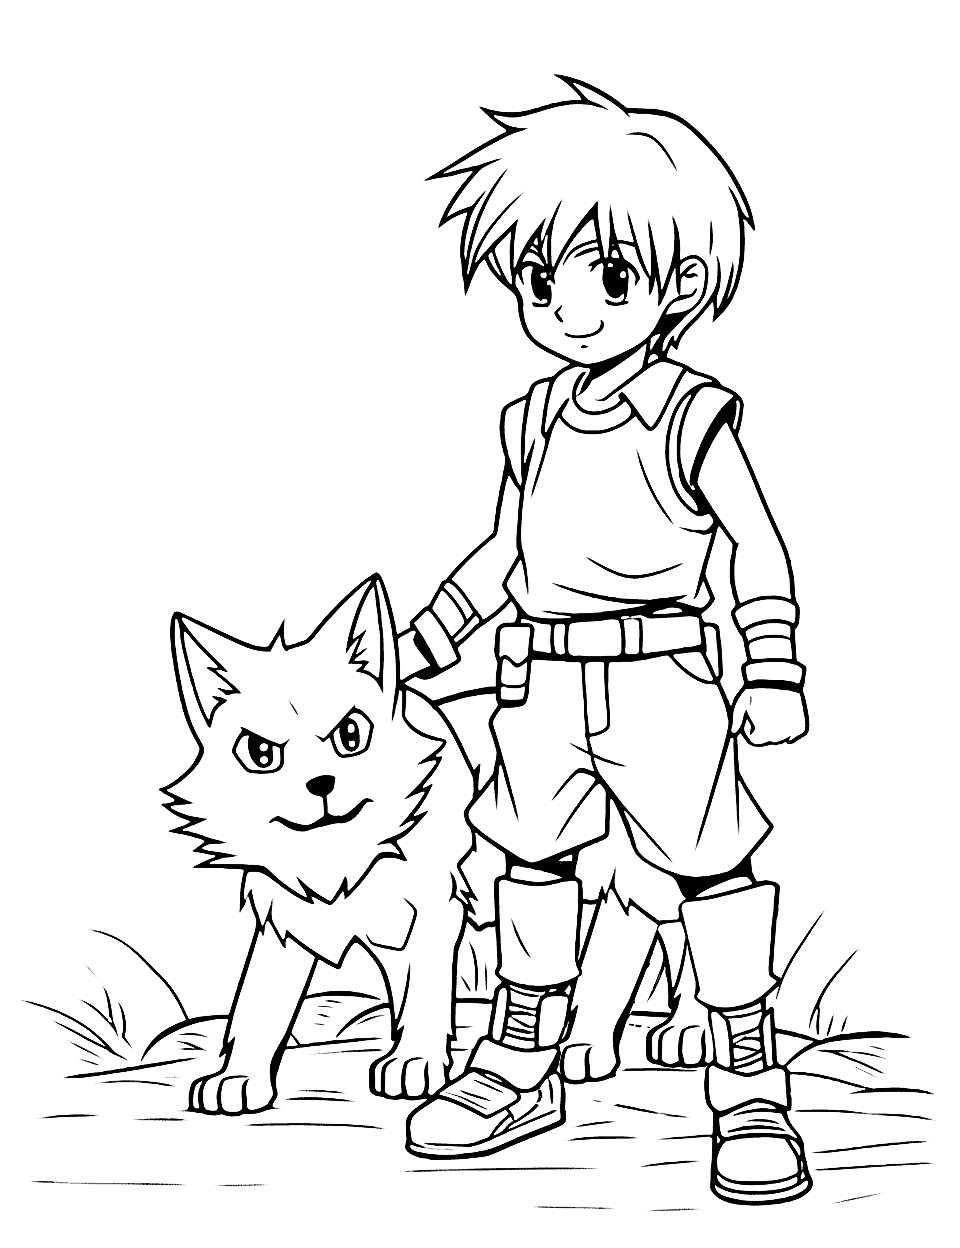 Anime Boy and his Wolf Friend Coloring Page - An anime boy and his wolf friend exploring the wilderness together.